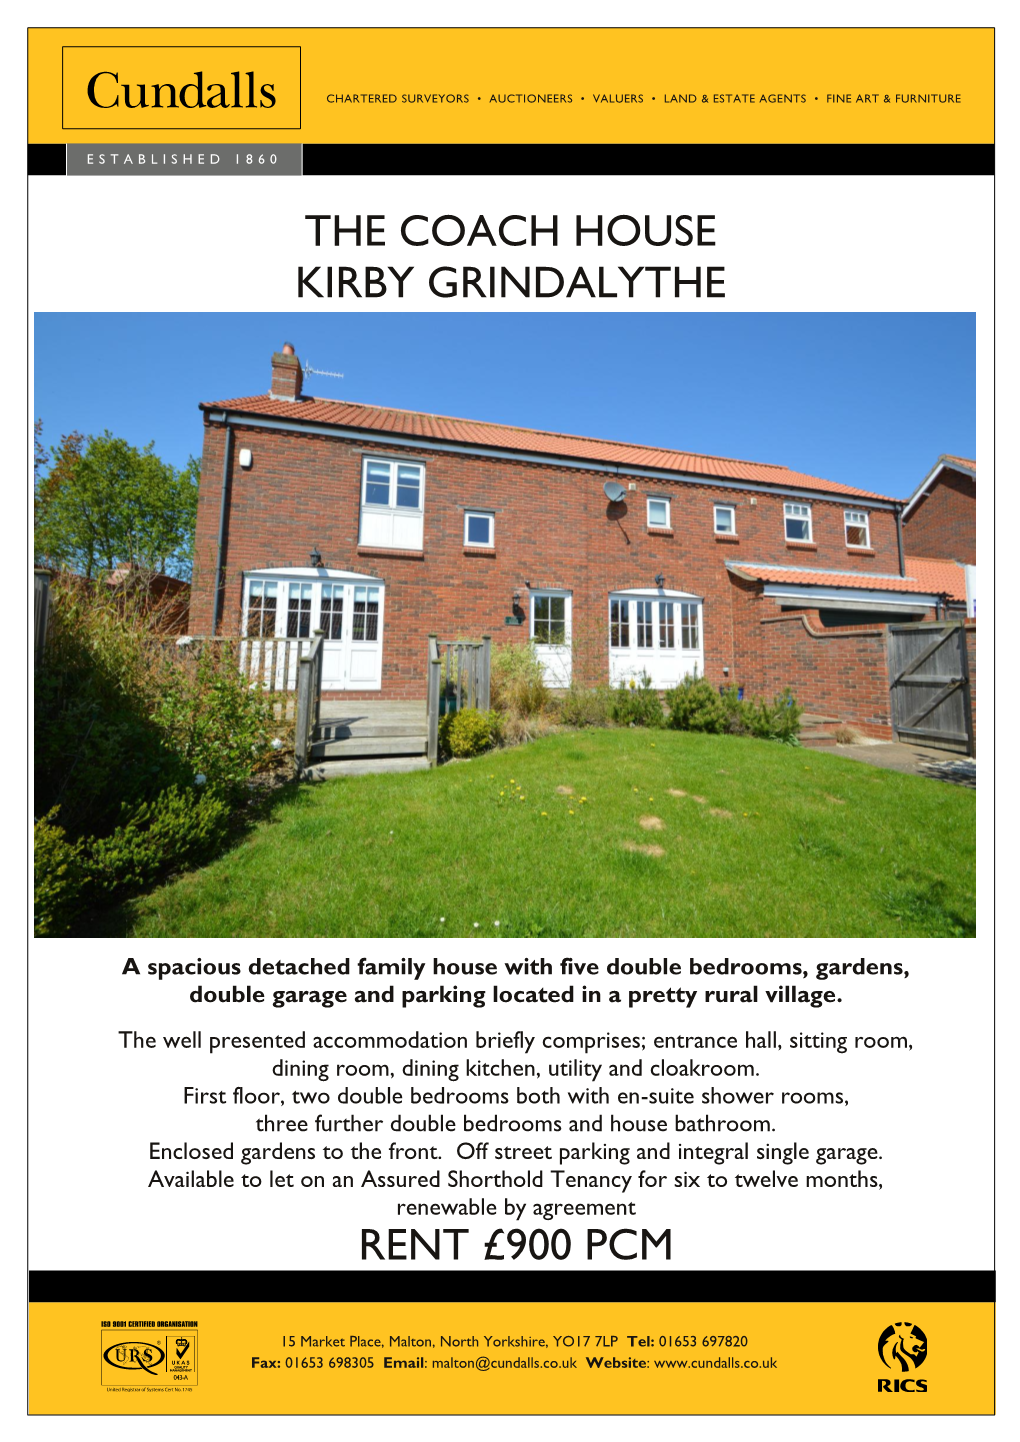 The Coach House Kirby Grindalythe Rent £900